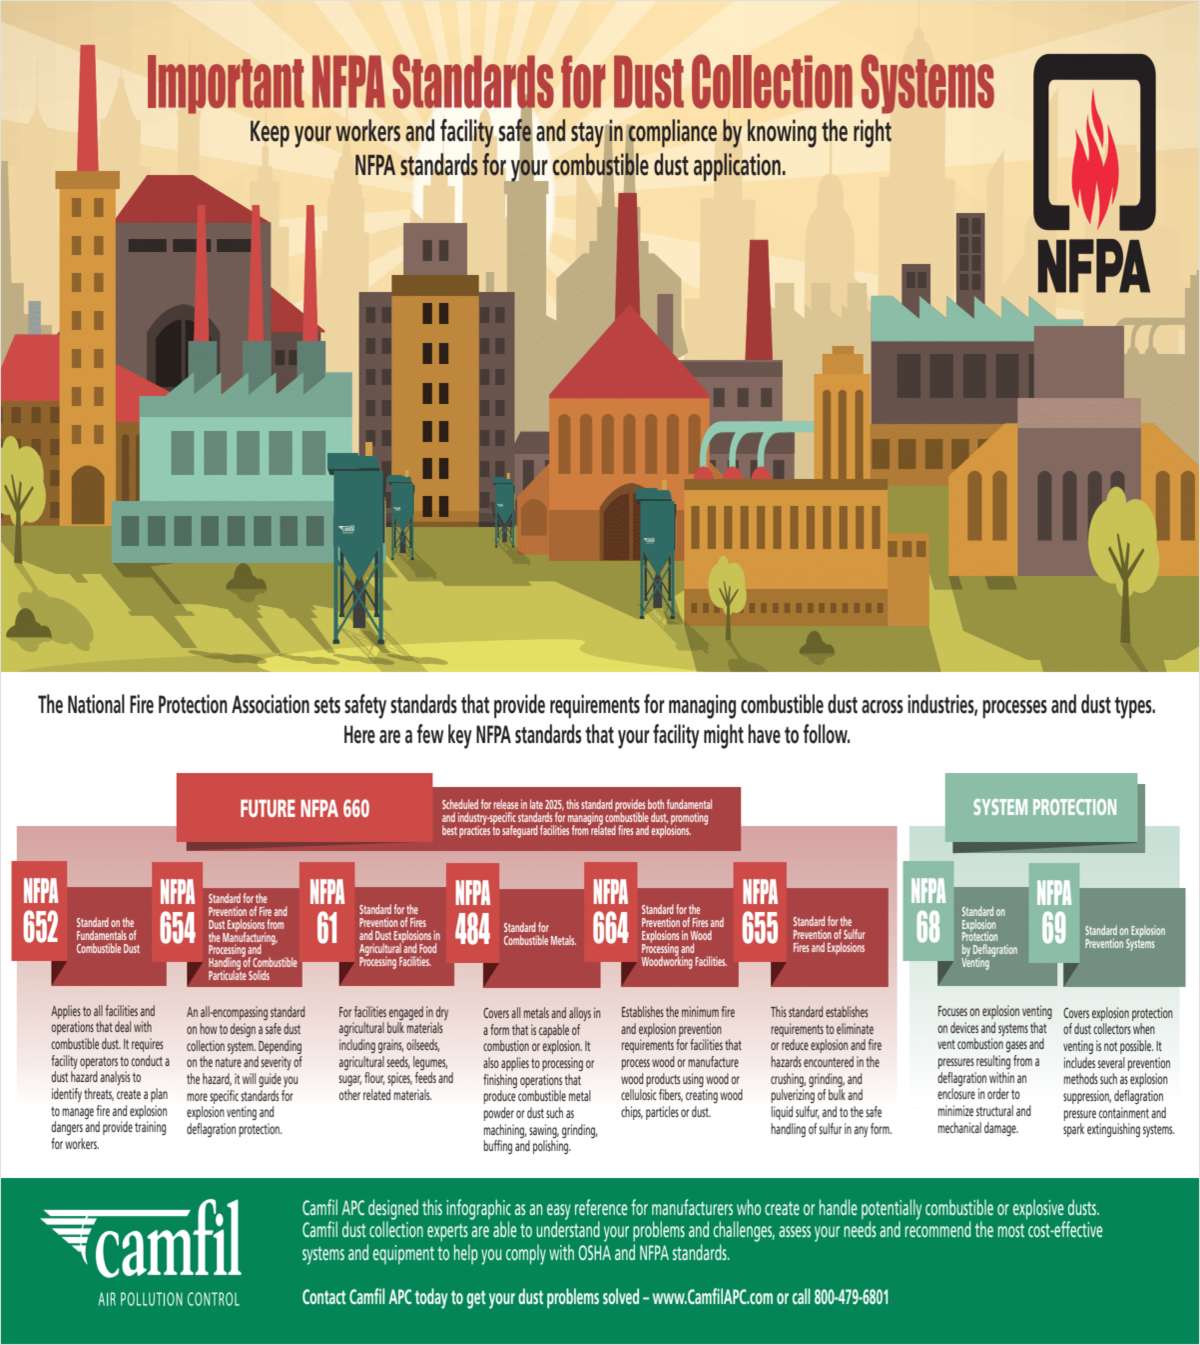 At-a-Glance Reference Poster of Key NFPA Standards Including the Future NFPA